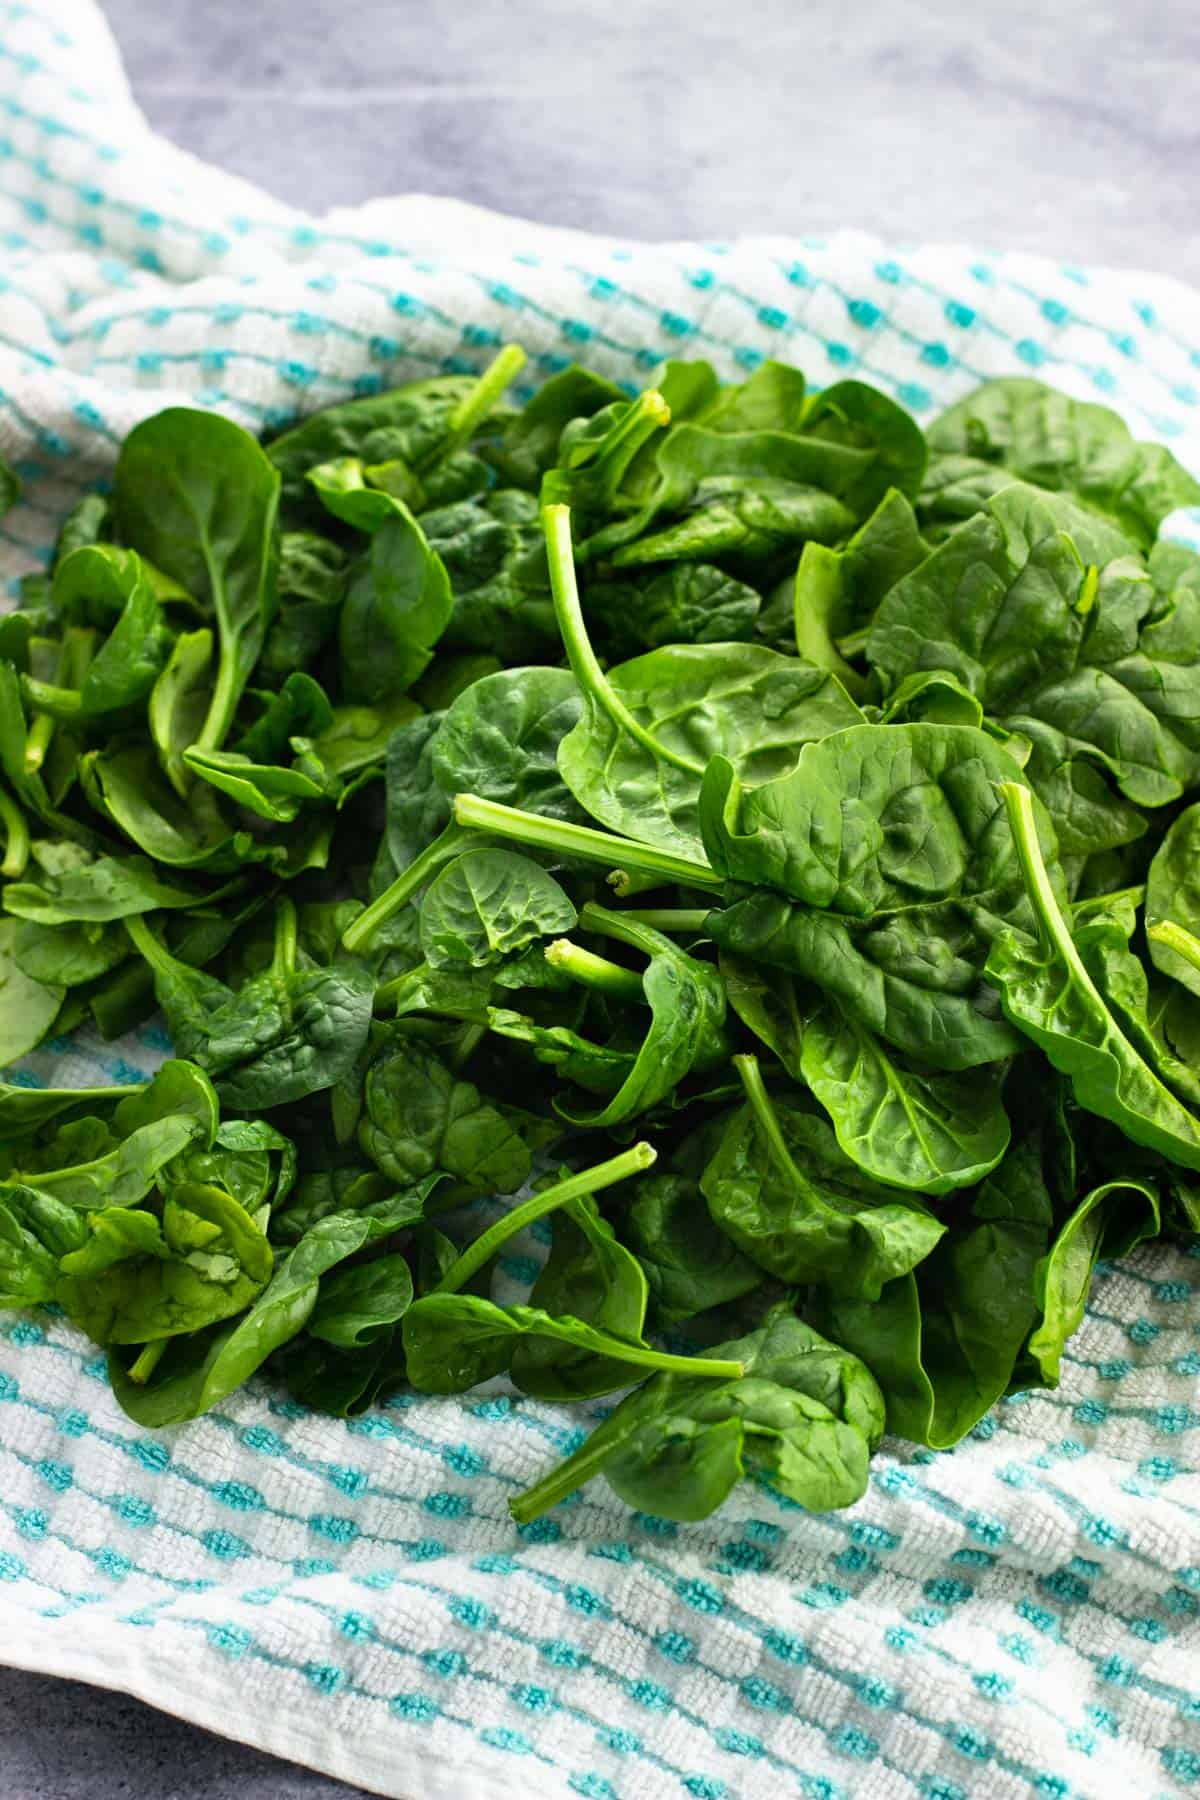 Spinach leaves drying on a kitchen towel.